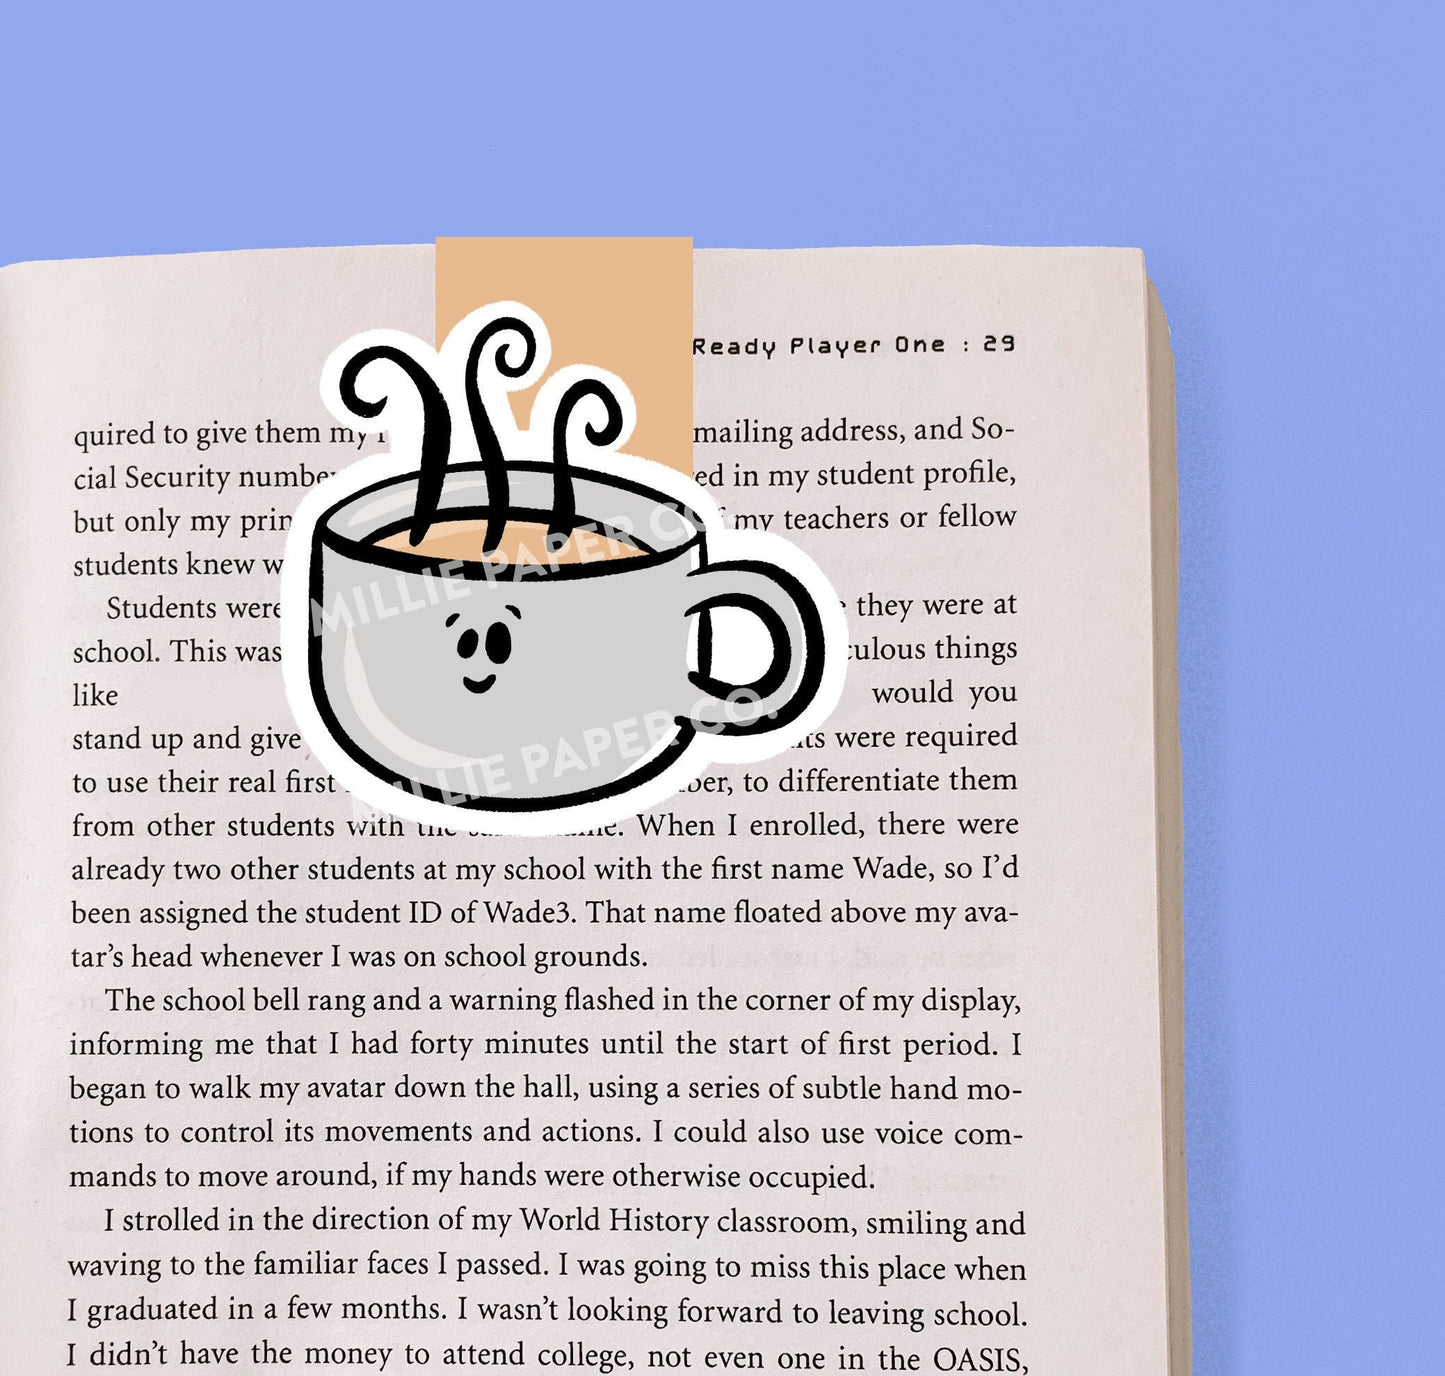 Coffee Cup Magnetic Bookmark